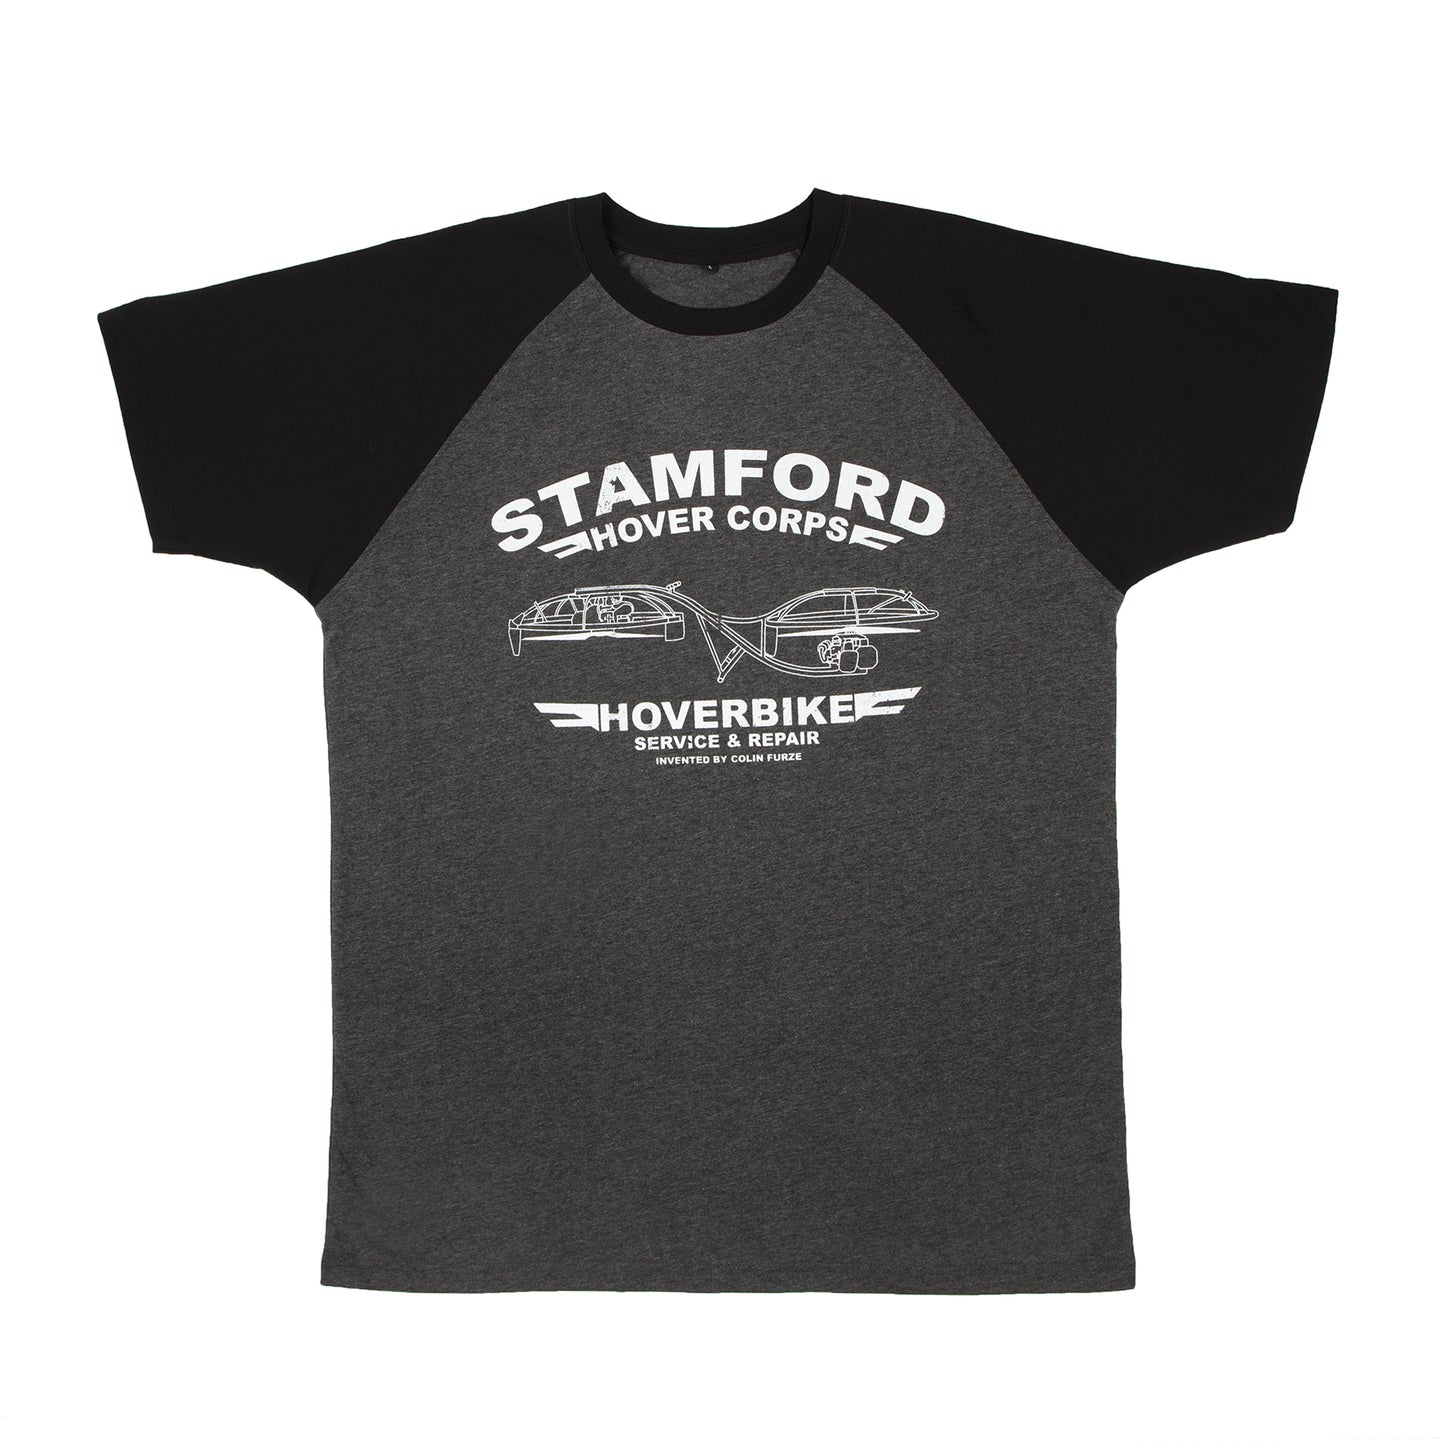 Kids' Stamford Hovercorps T-Shirt - Grey/Charcoal